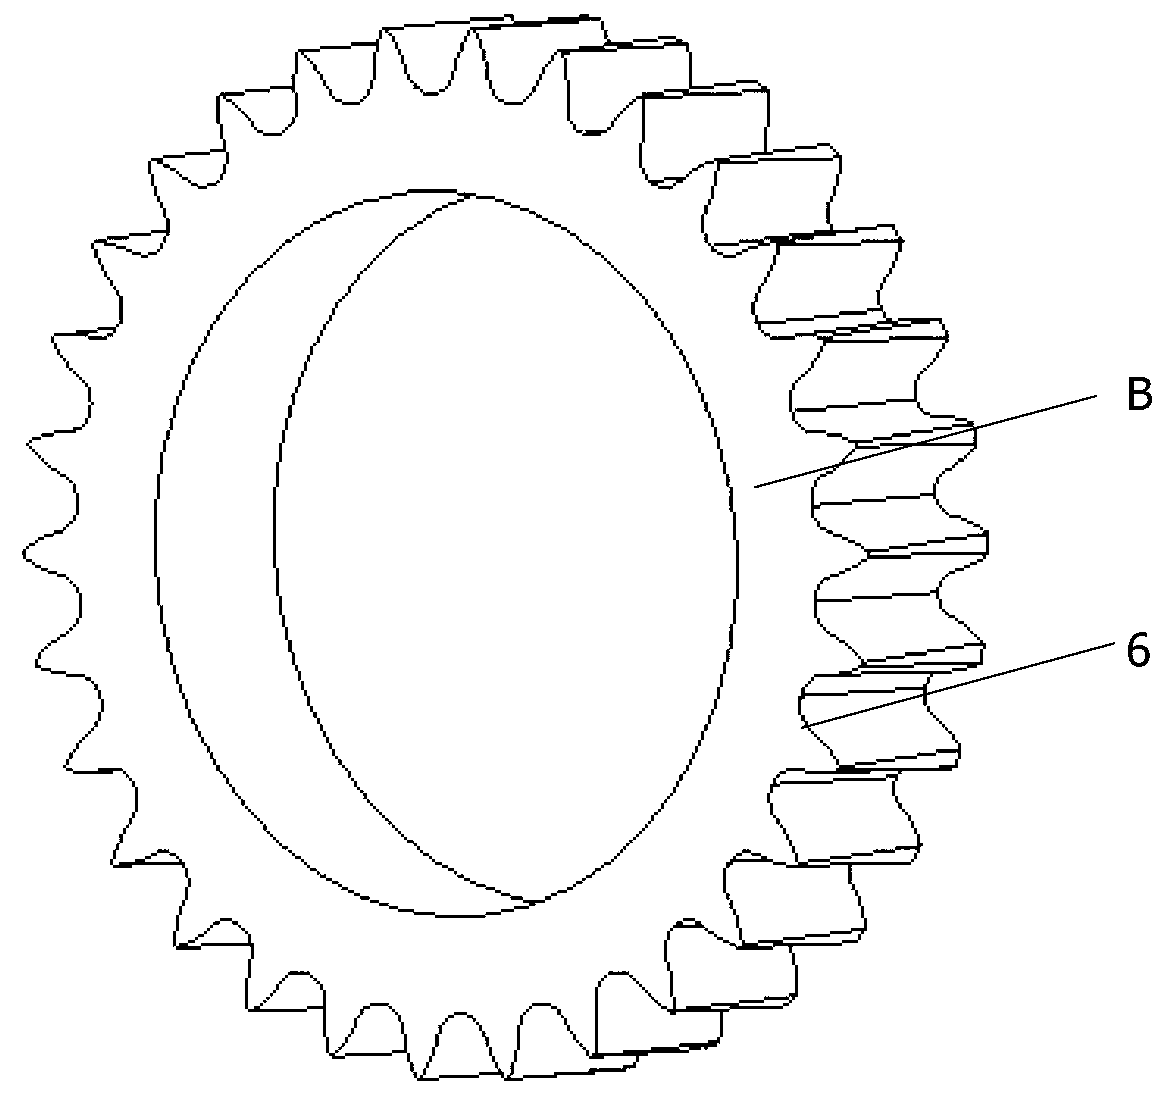 Anti-backlash transmission comprising trochoid gears and roll pins with conical teeth